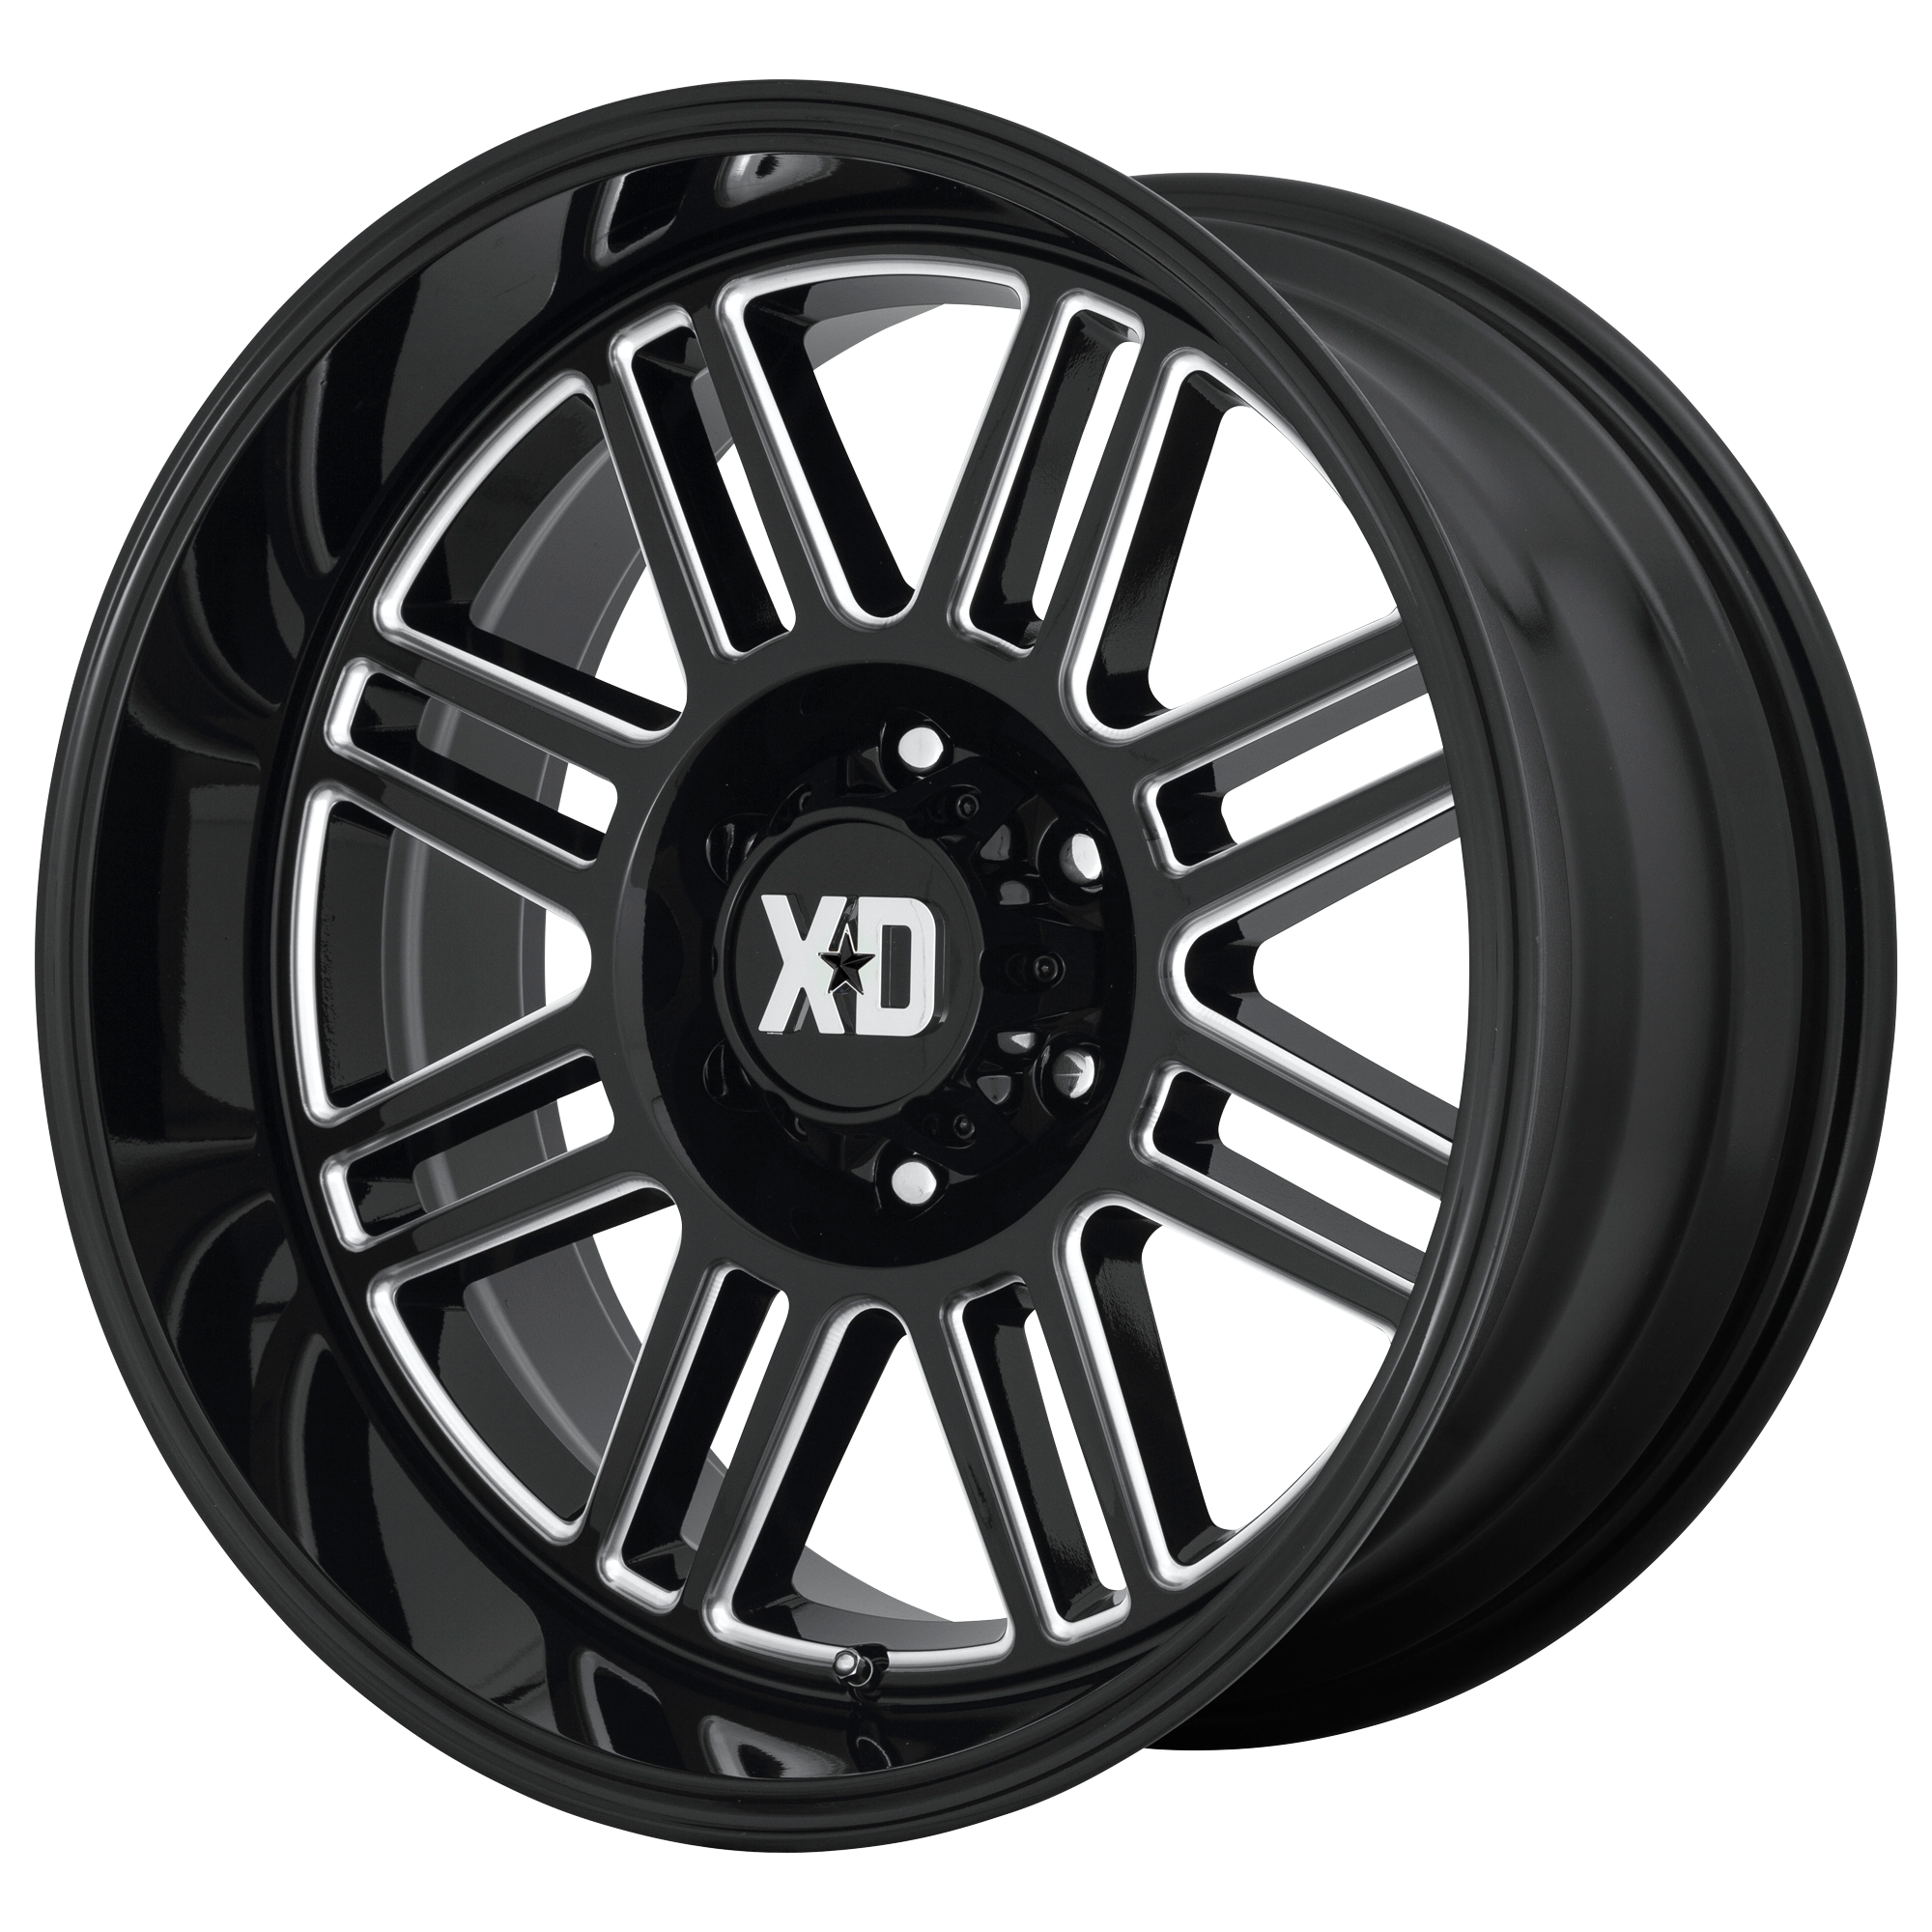 CAGE 22x10 6x135.00 GLOSS BLACK MILLED (-18 mm) - Tires and Engine Performance